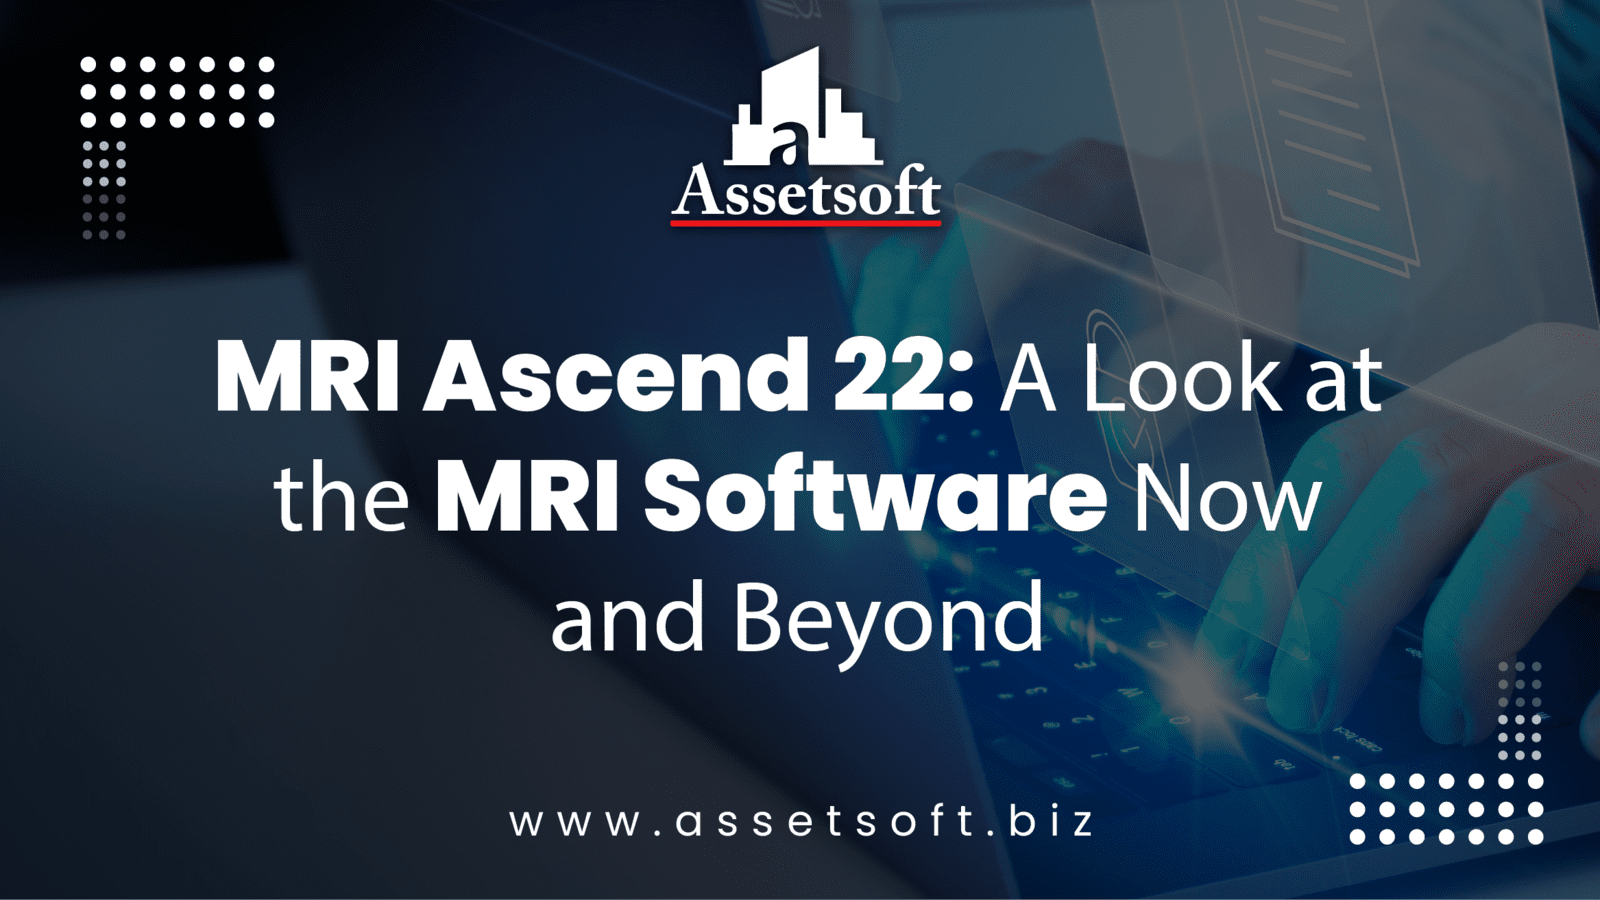 MRI Ascend 22: A Look at the MRI Software Now and Beyond 